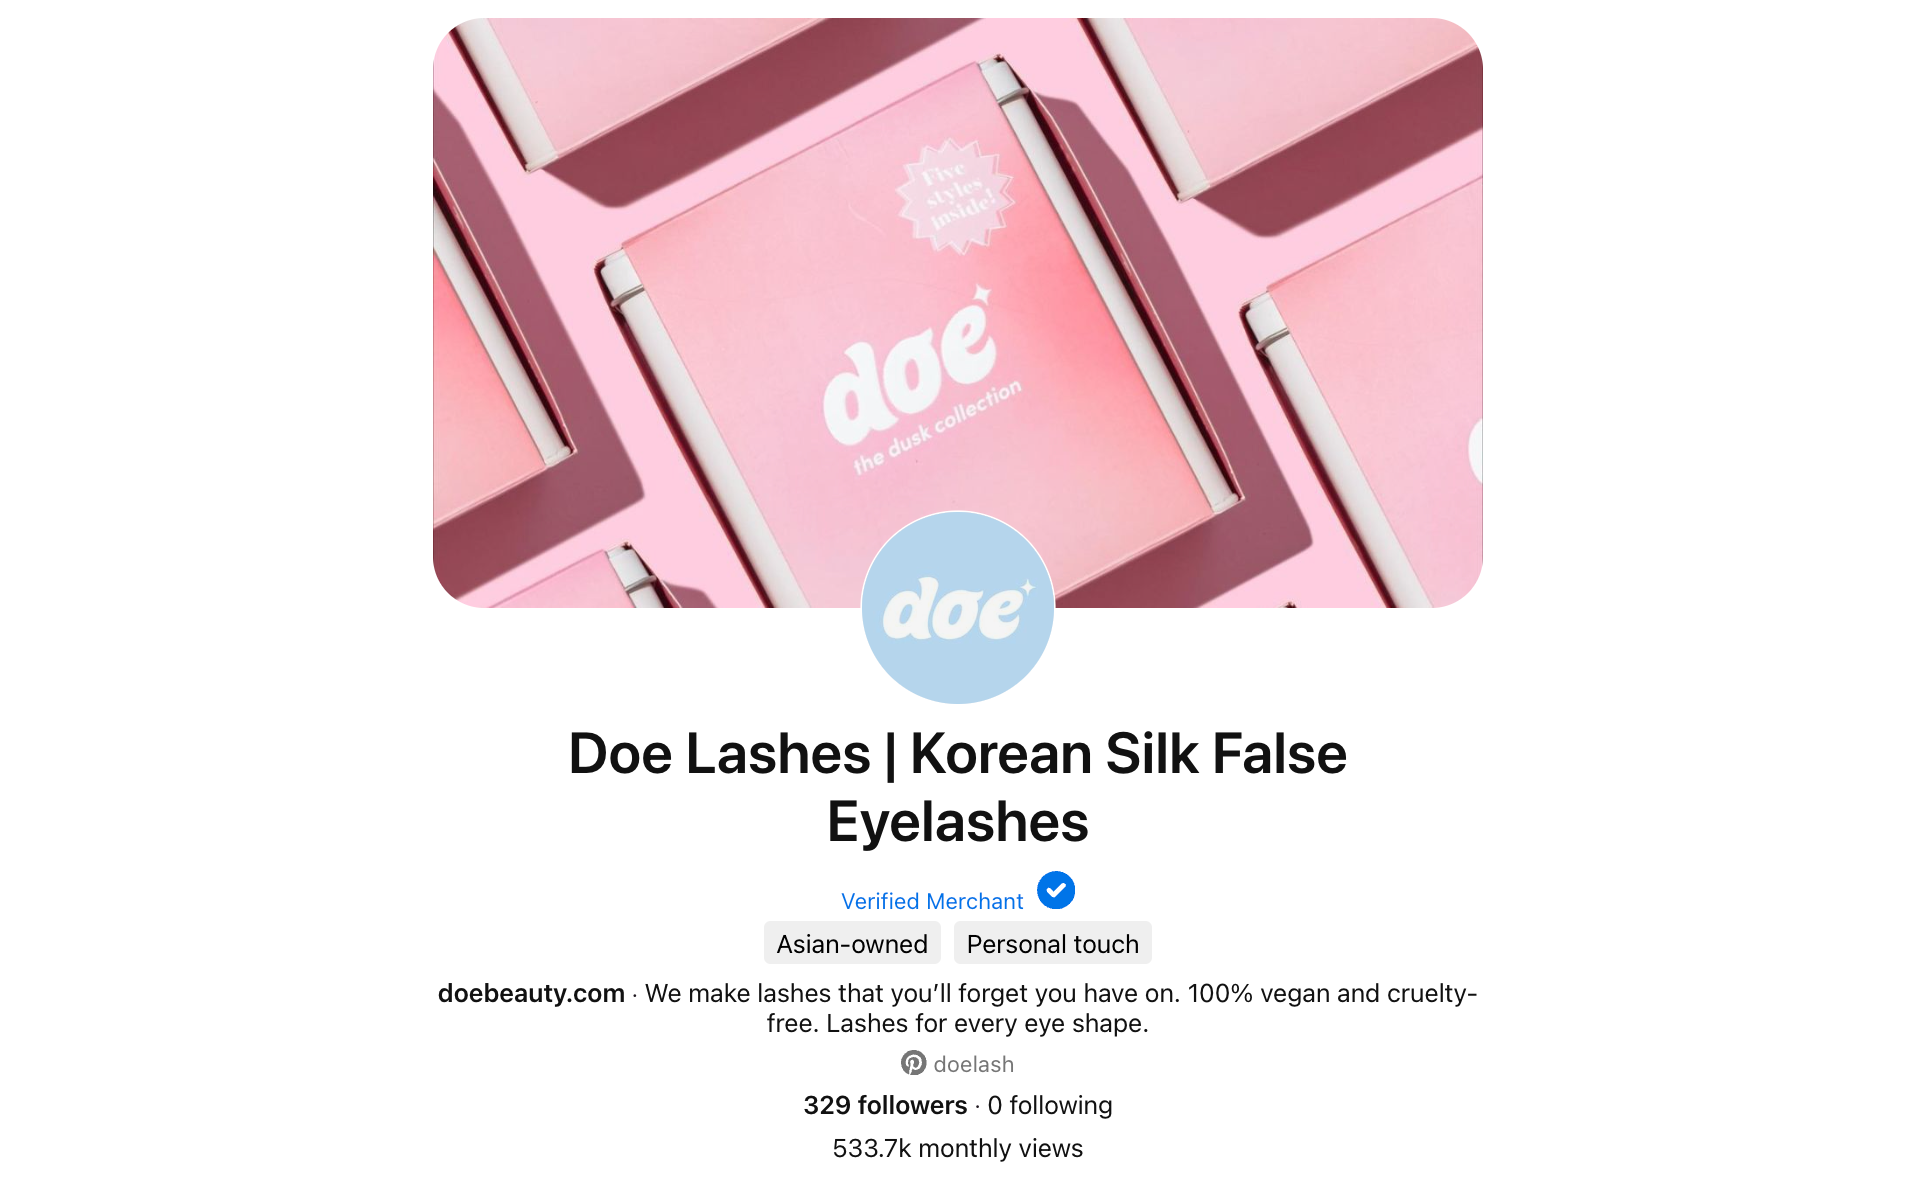 Pinterest bio and page for Doe Lashes